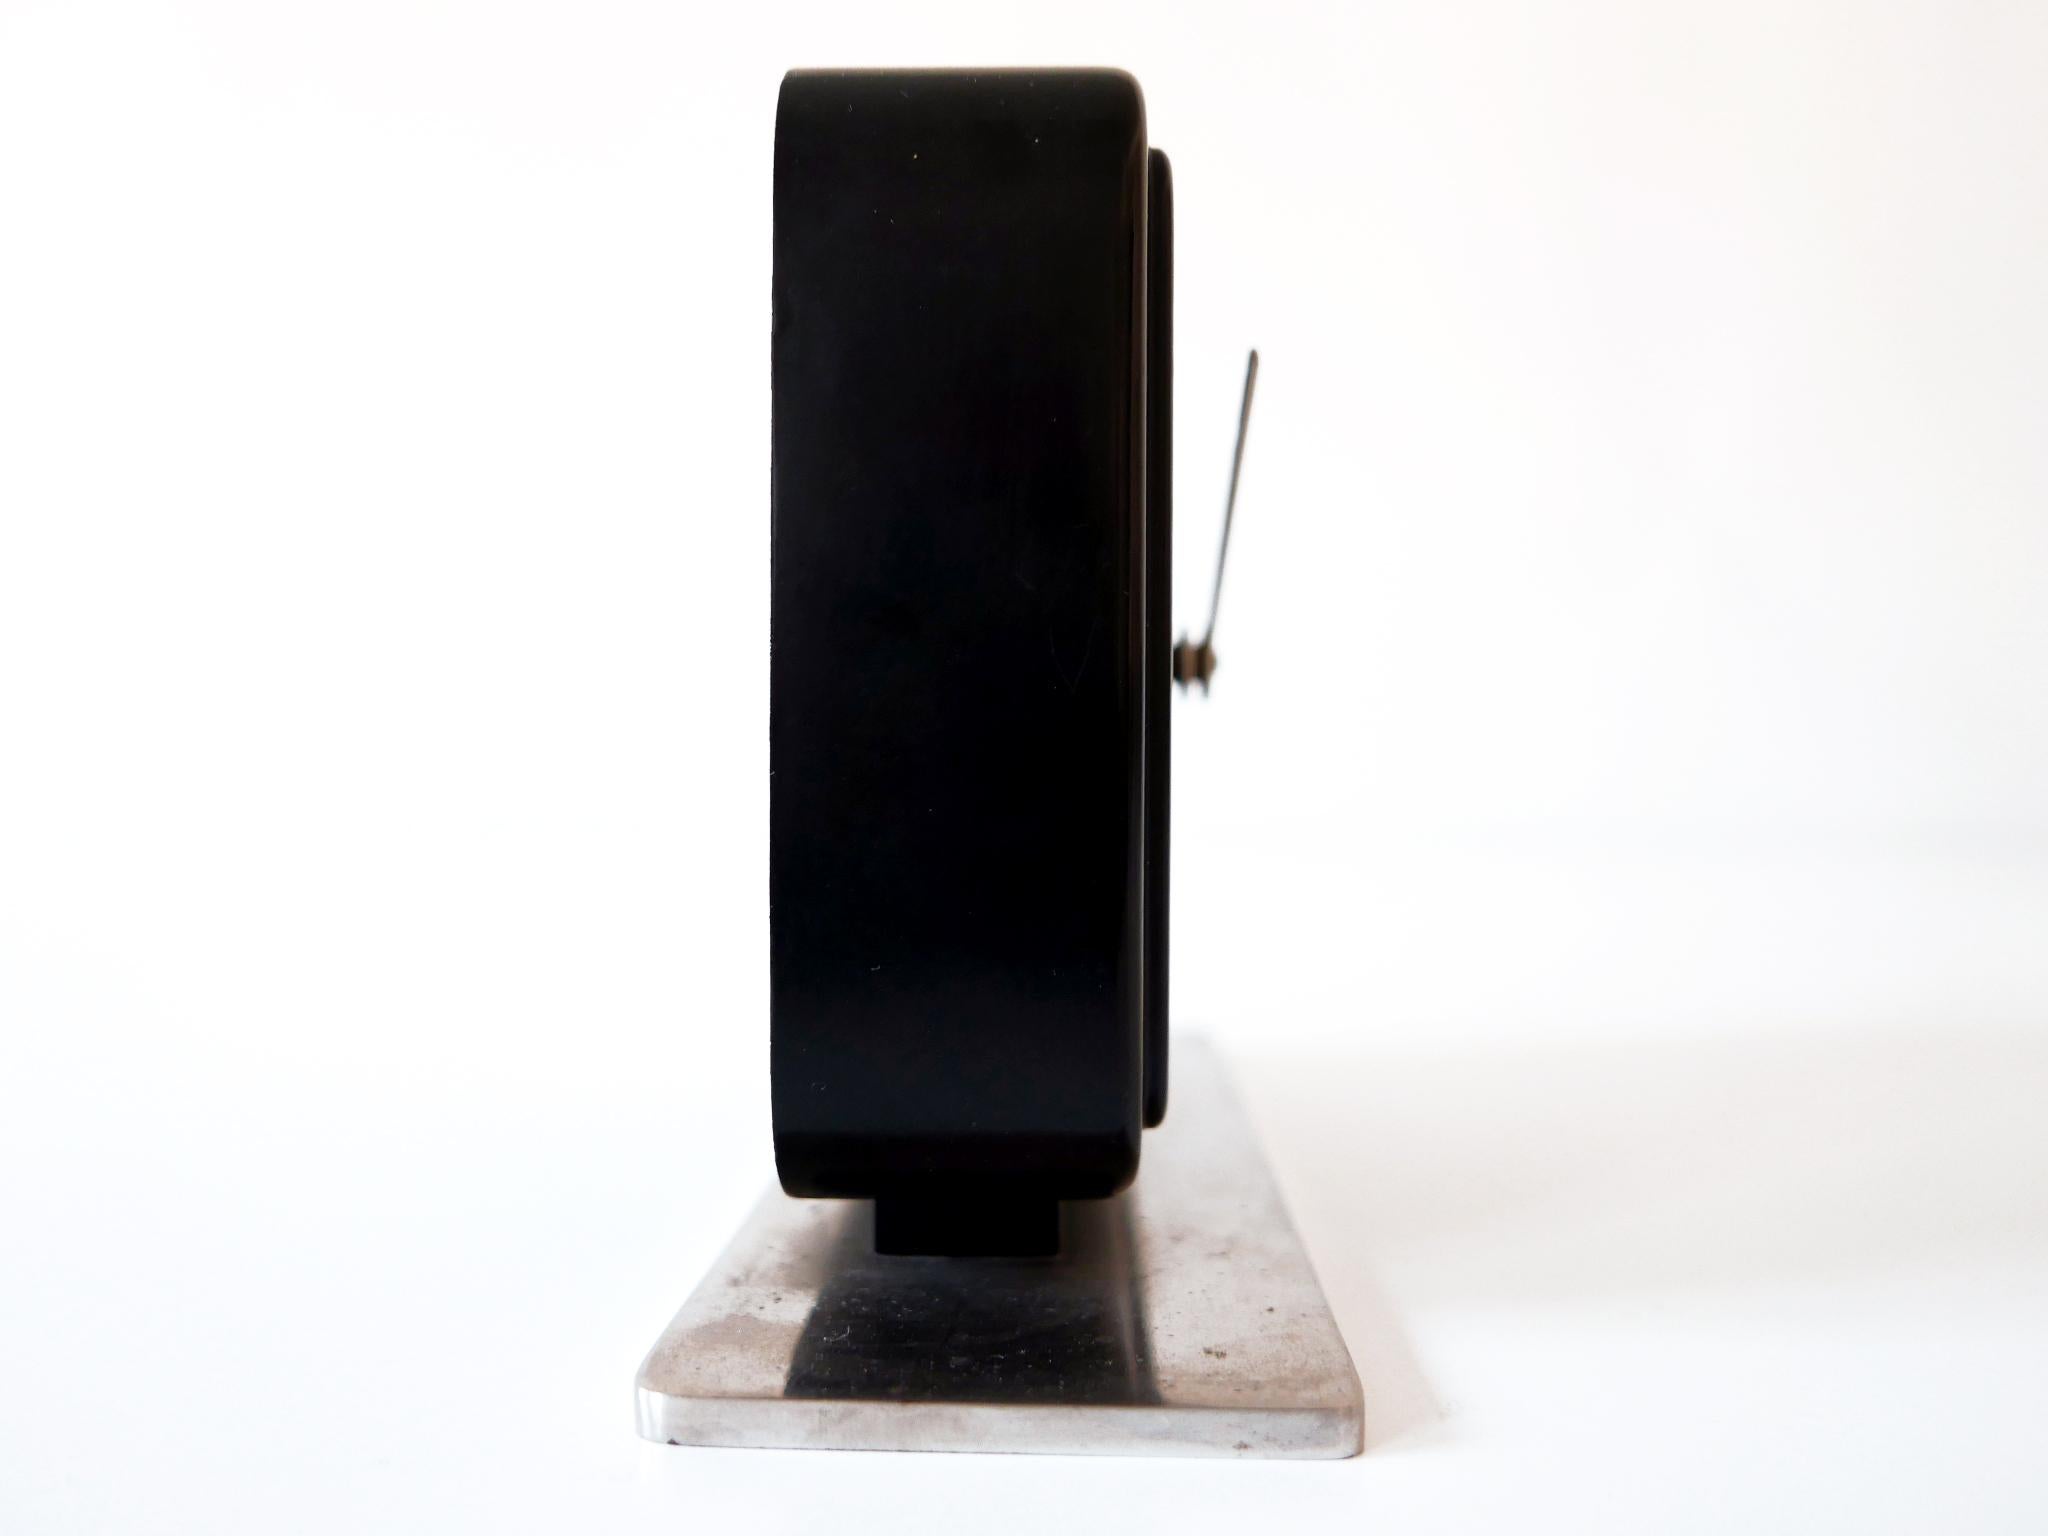 Bauhaus Table or Desk Clock by Marianne Brandt for Ruppelwerk Gotha Germany 1932 In Good Condition For Sale In Munich, DE